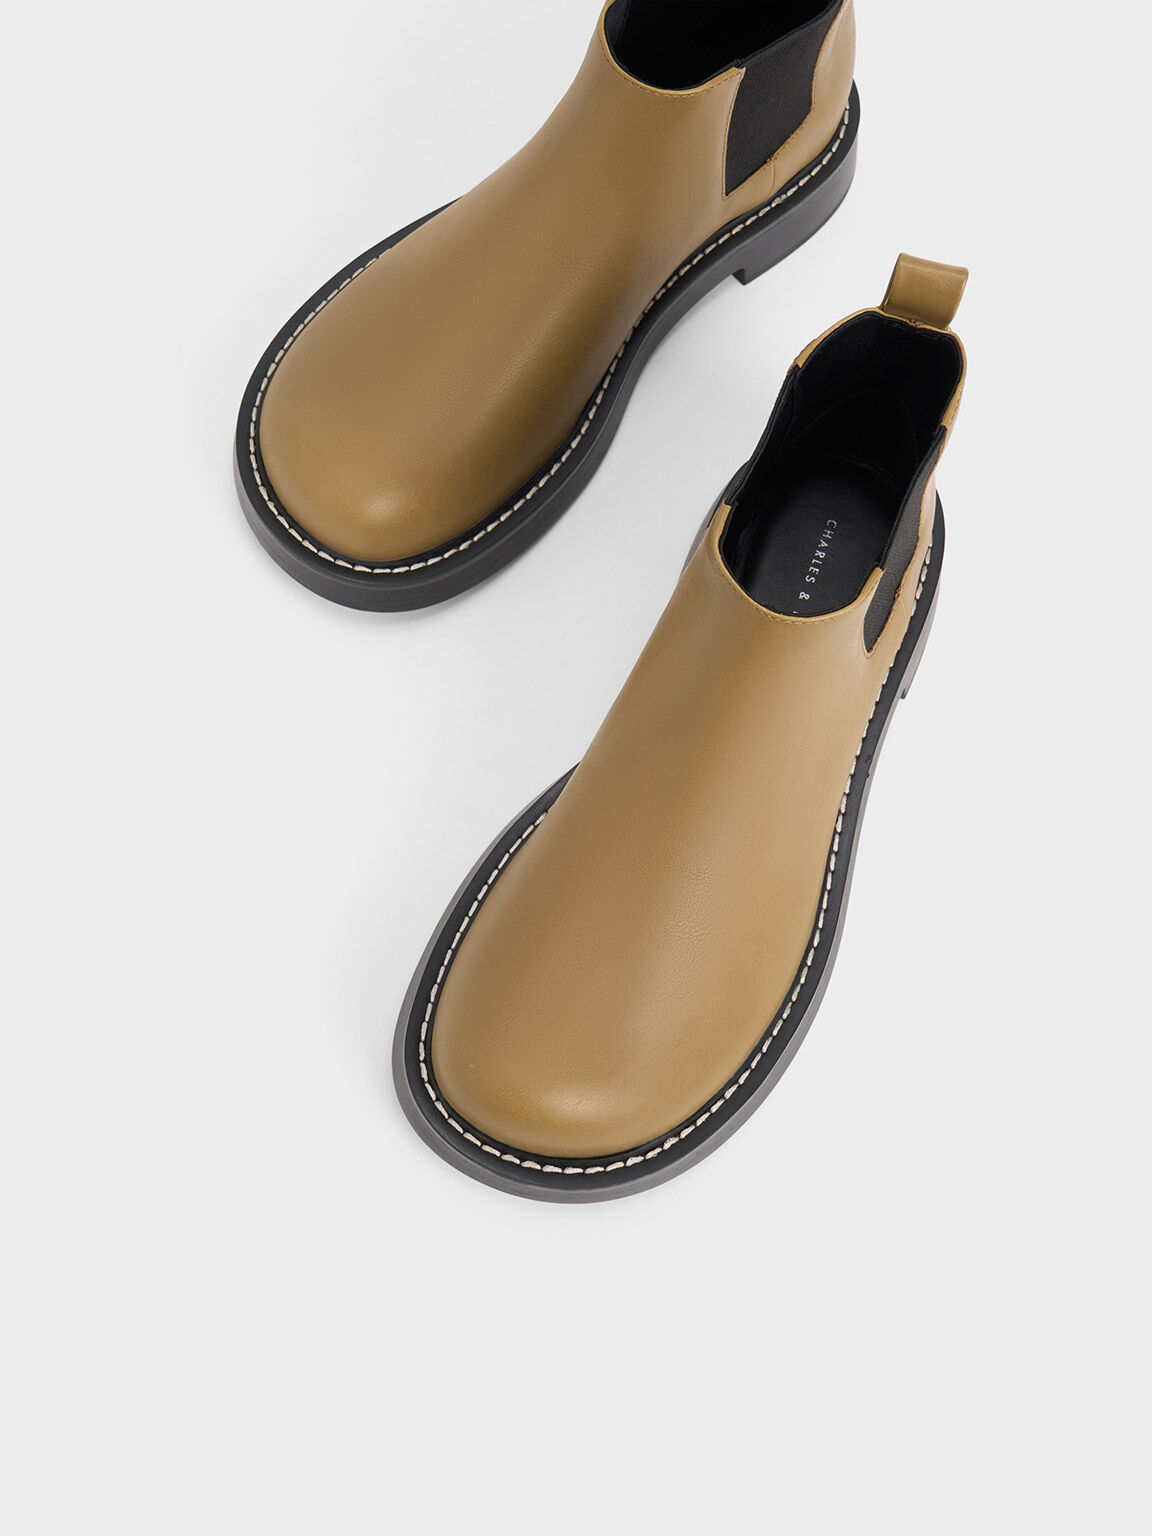 Penelope Pull-Tab Chelsea Boots, Olive, hi-res